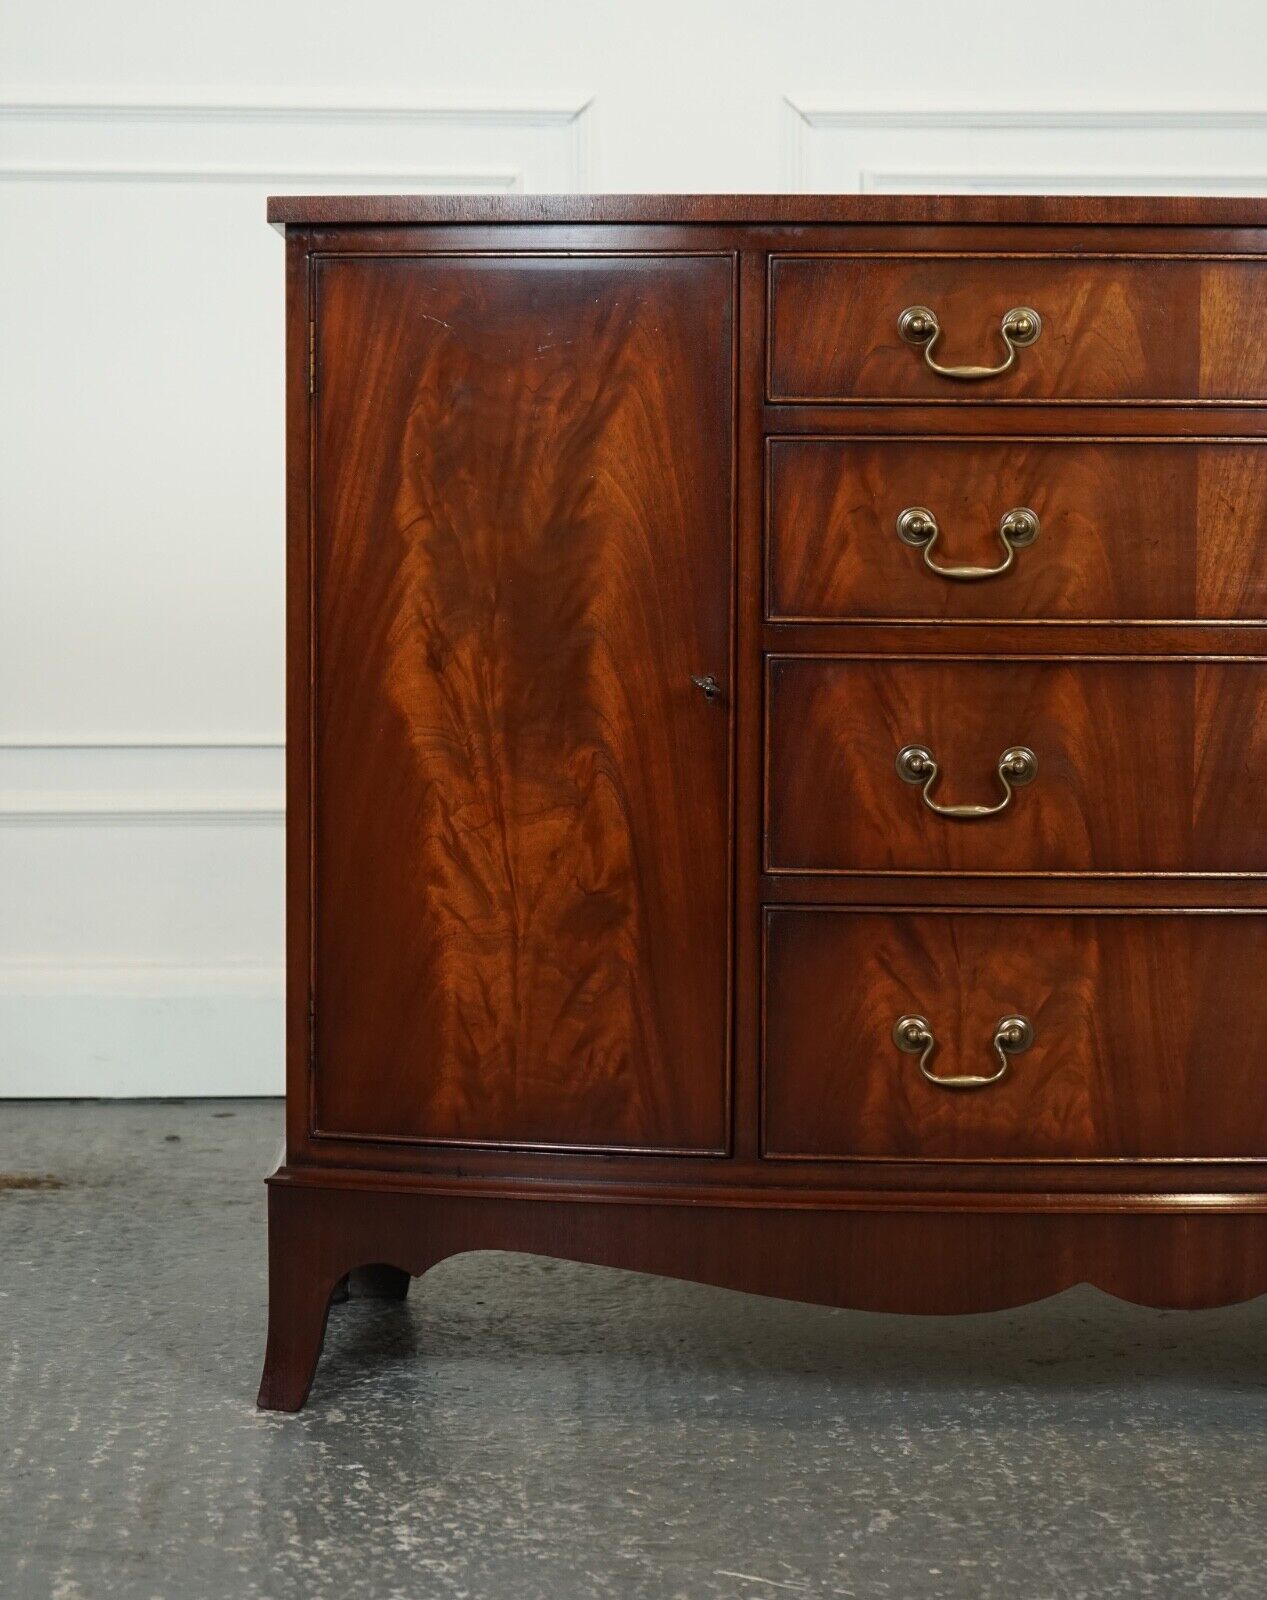 STUNNING REPRODUX BEVAN FUNNELL SIDEBOARD WITH DRAWERS J1